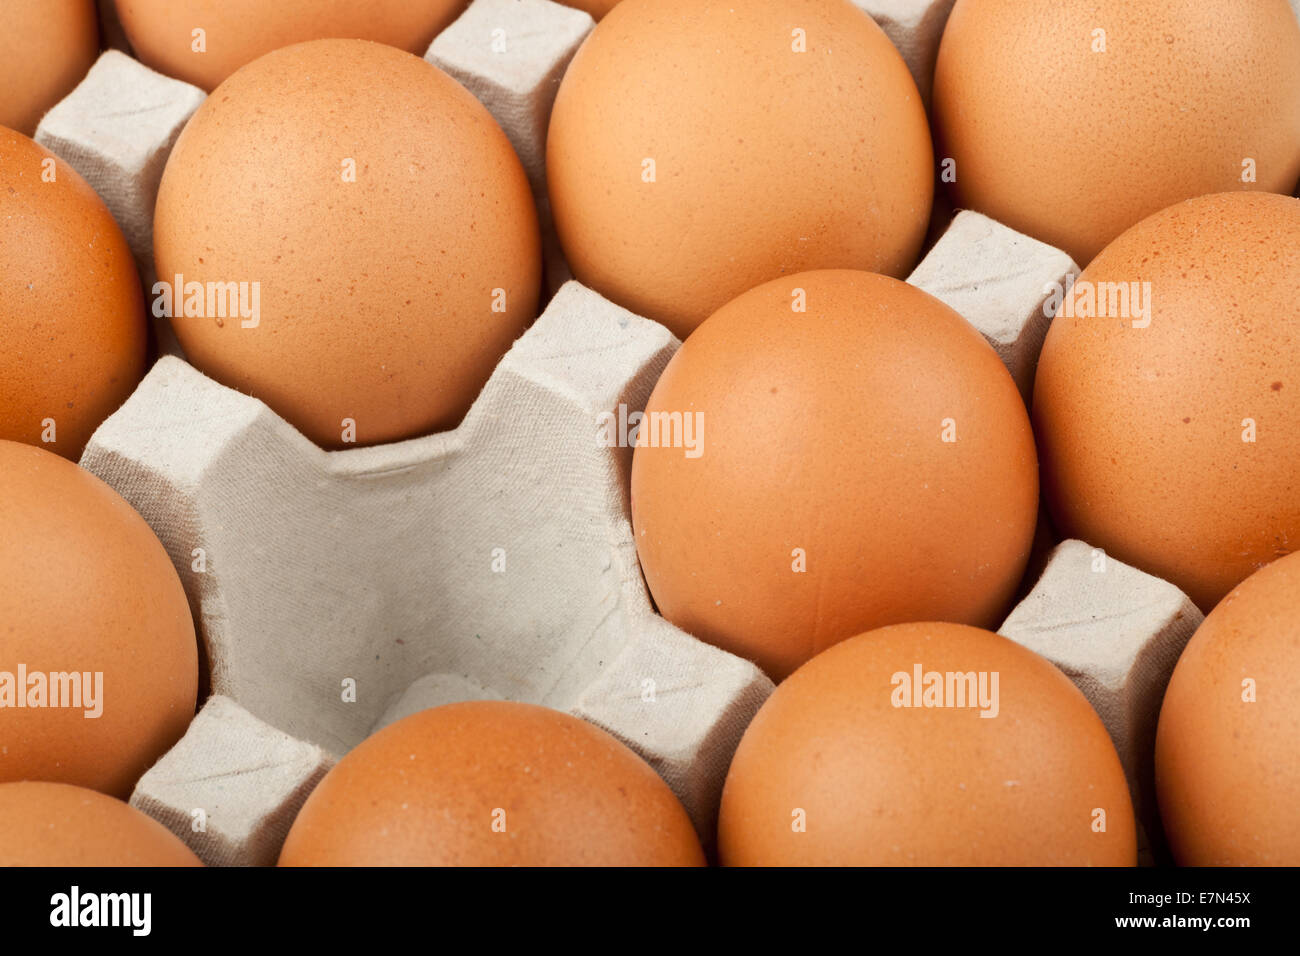 A tray of chicken eggs with one missing Stock Photo